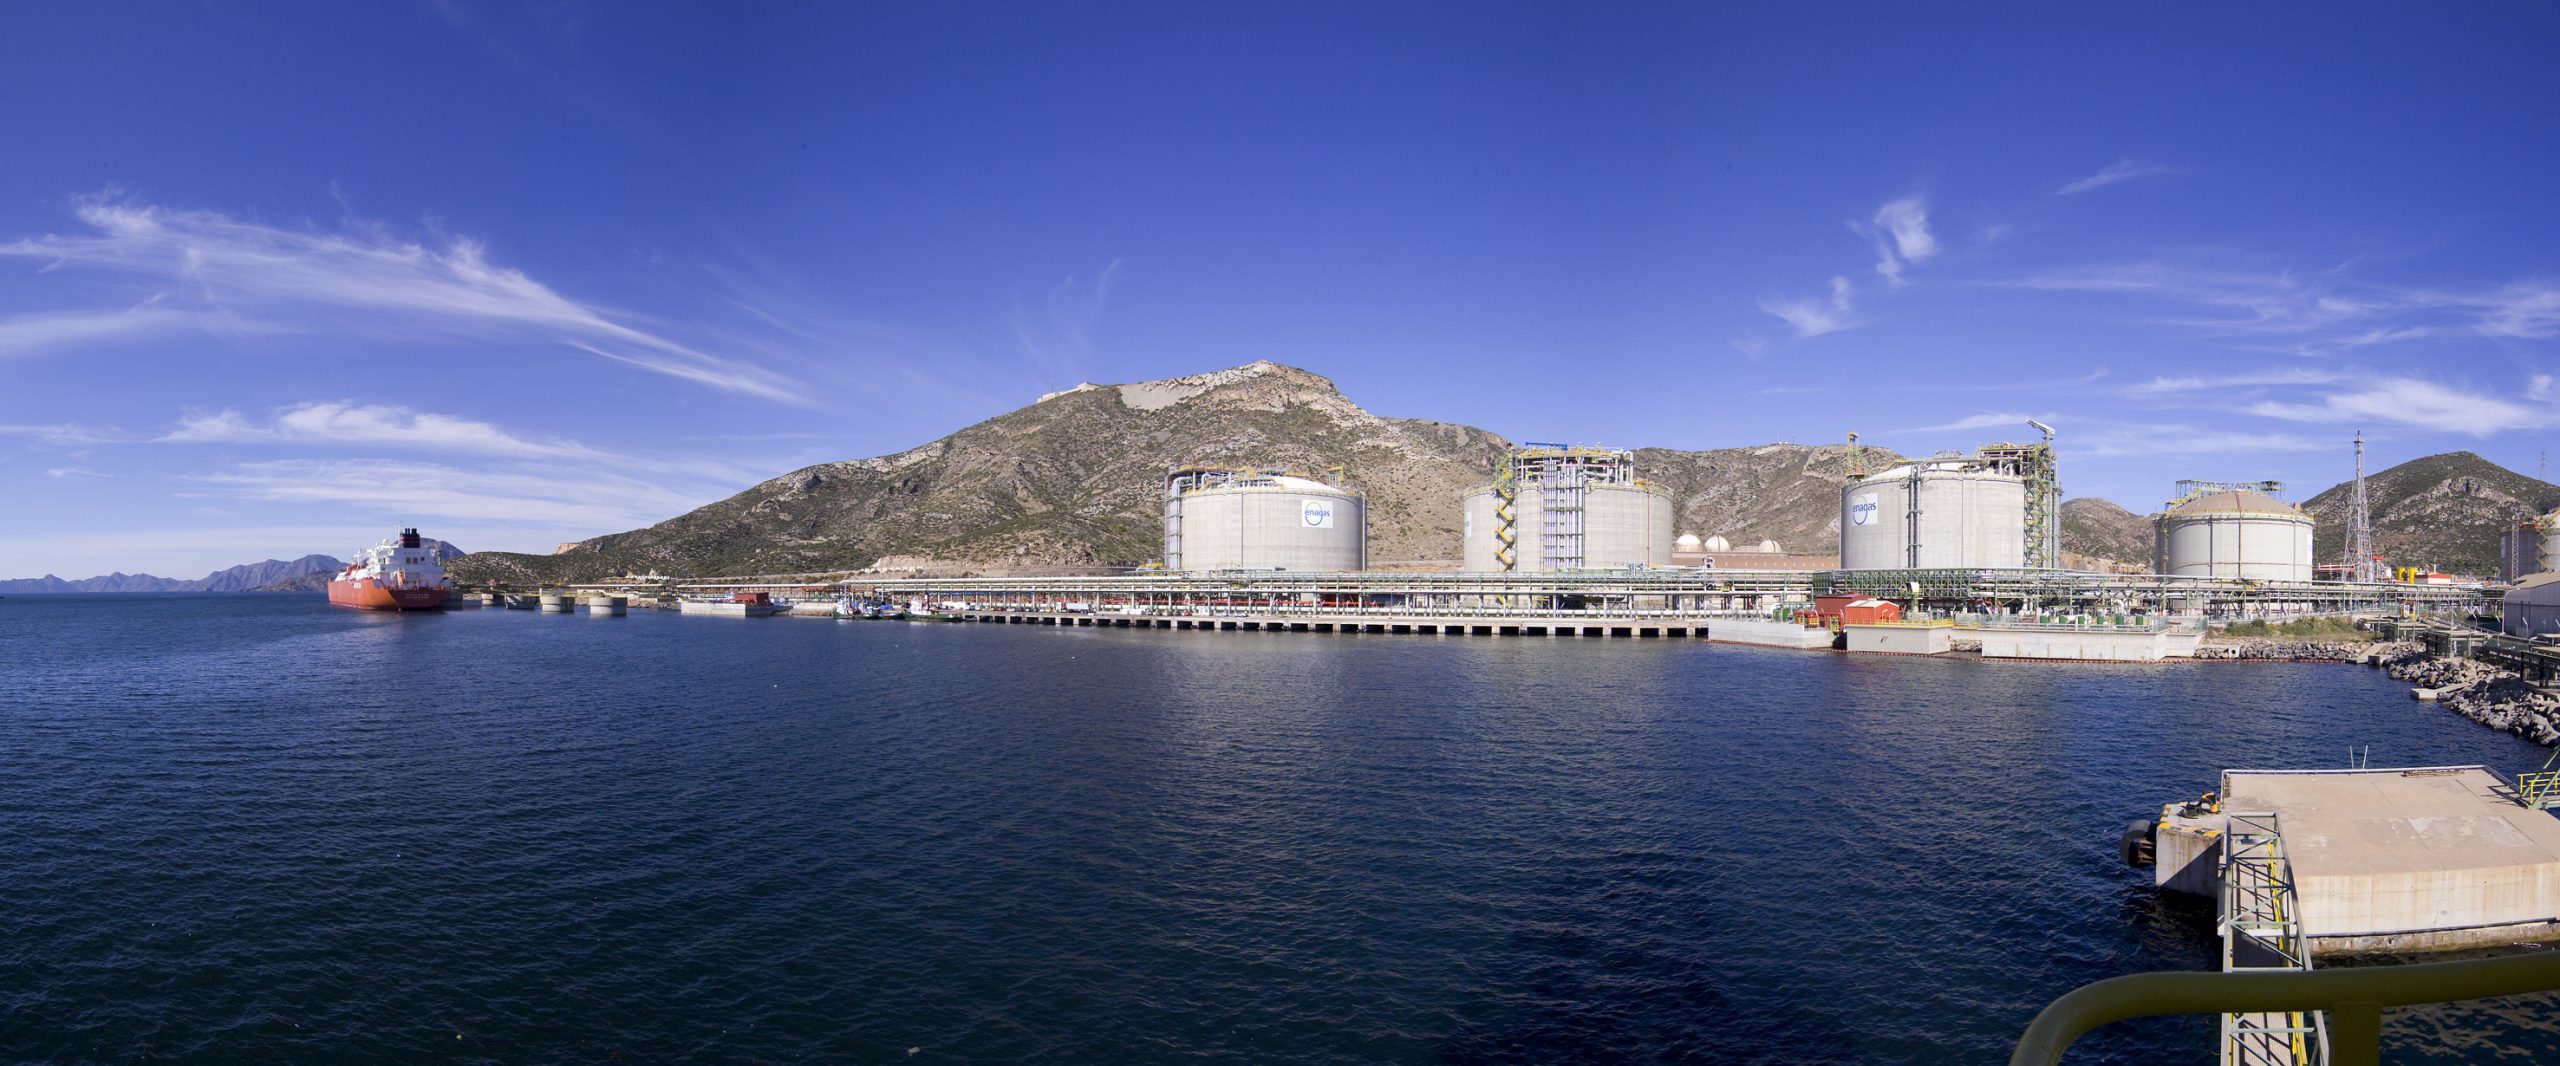 Spanish LNG imports up in September